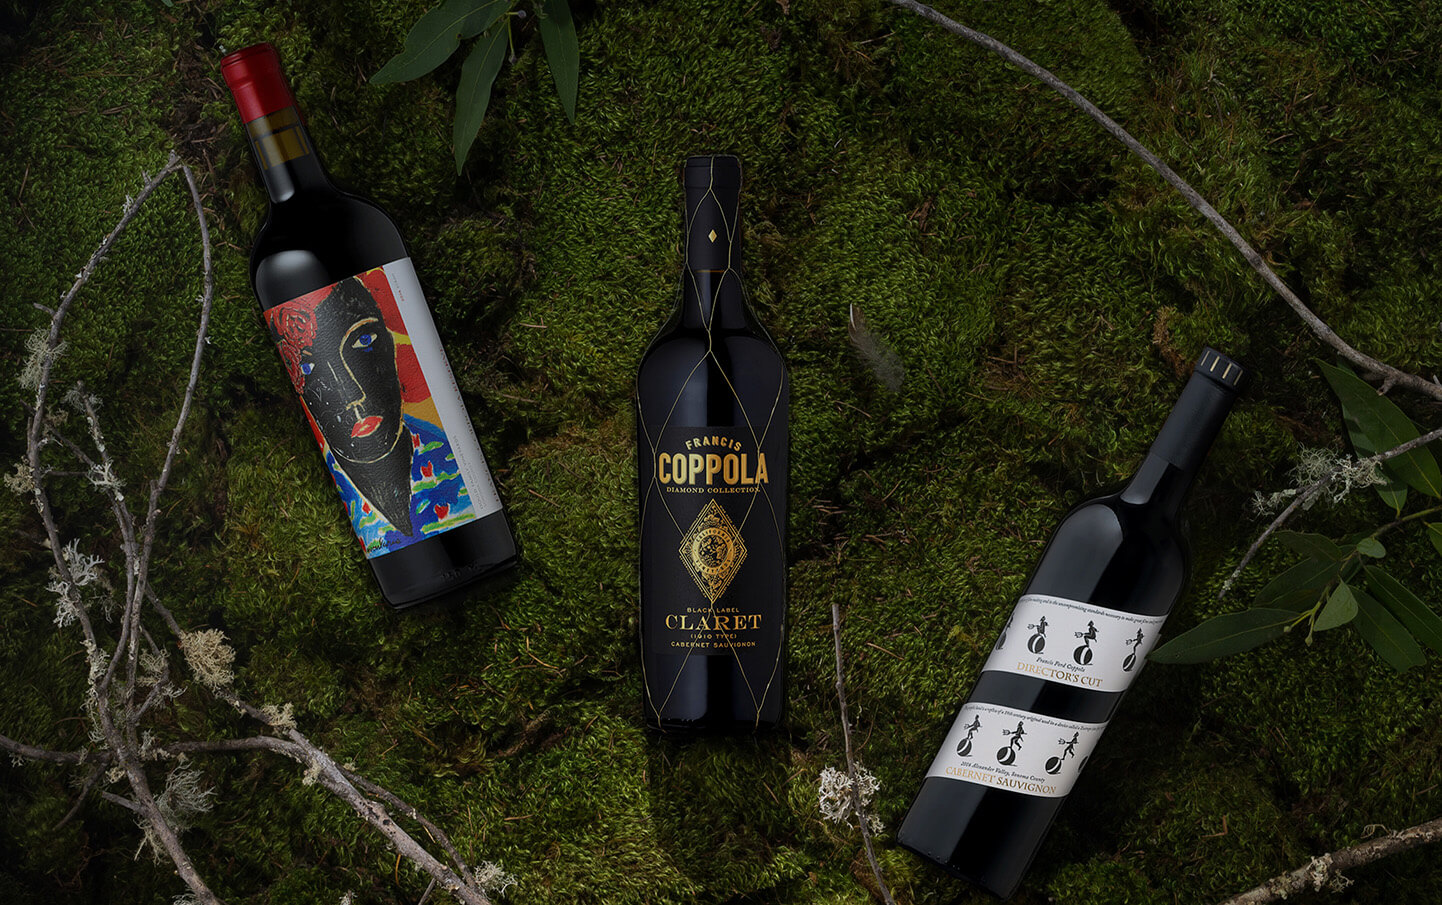 How wine became Francis Ford Coppola's consuming passion